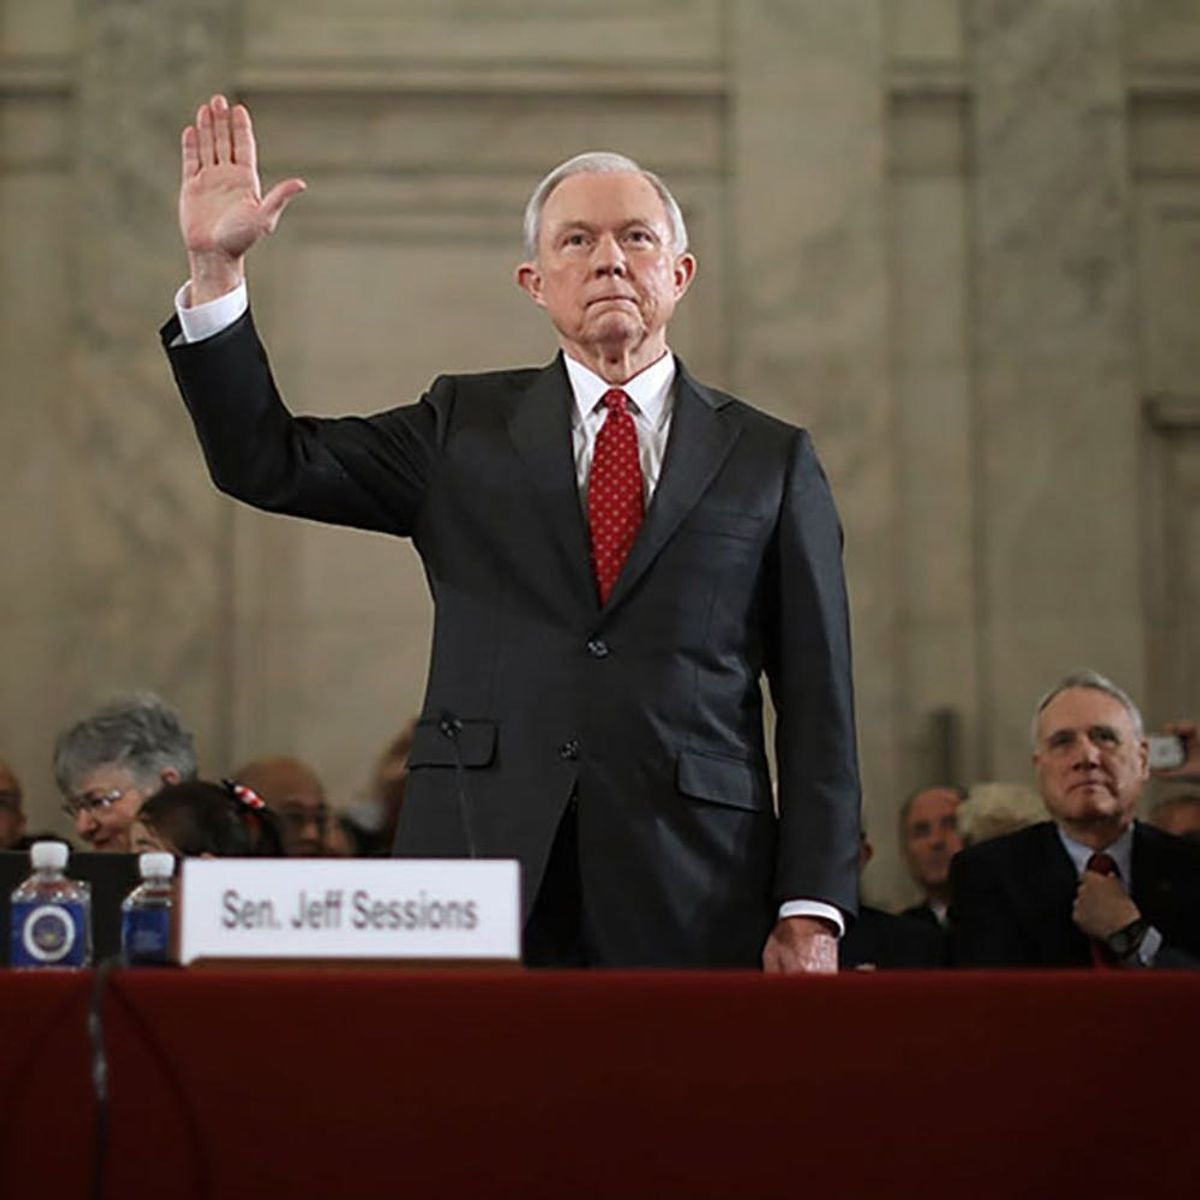 Why Women Across the US Are Freaking the F Out About Jeff Sessions